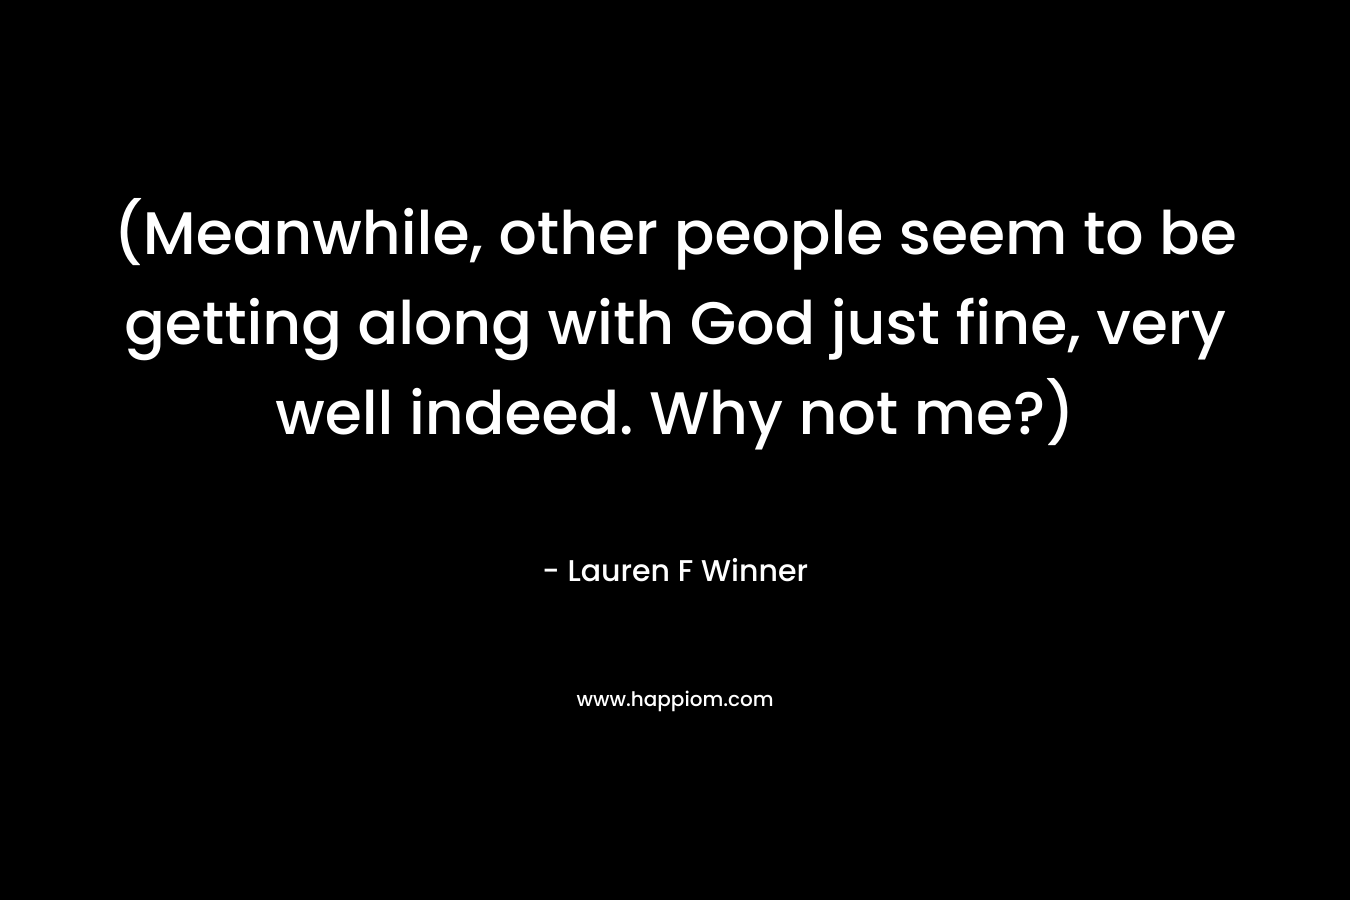 (Meanwhile, other people seem to be getting along with God just fine, very well indeed. Why not me?) – Lauren F Winner